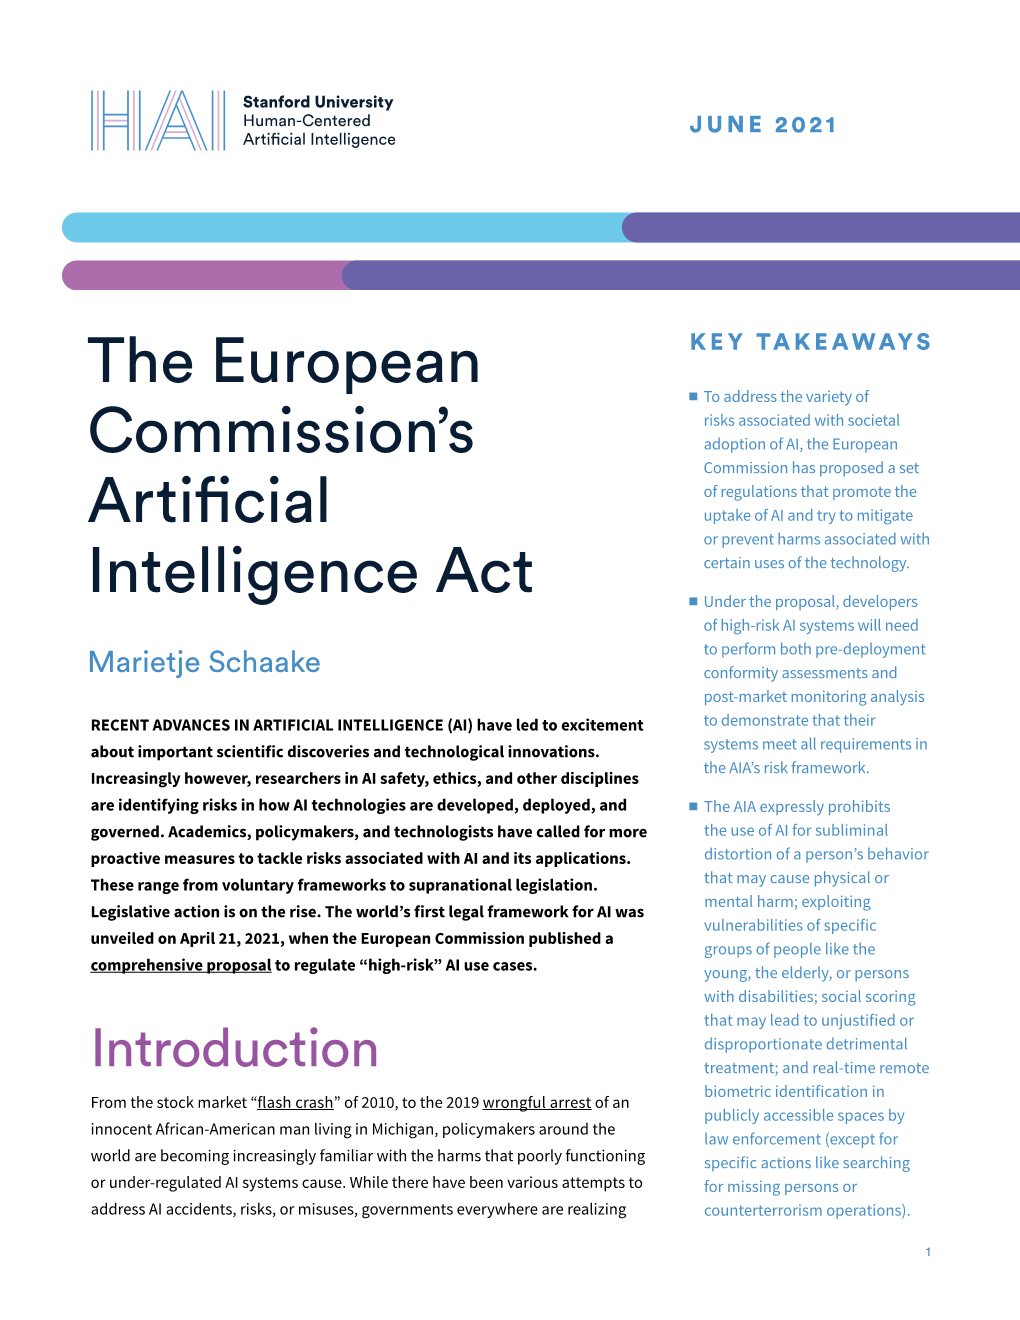 The European Commission's Artificial Intelligence